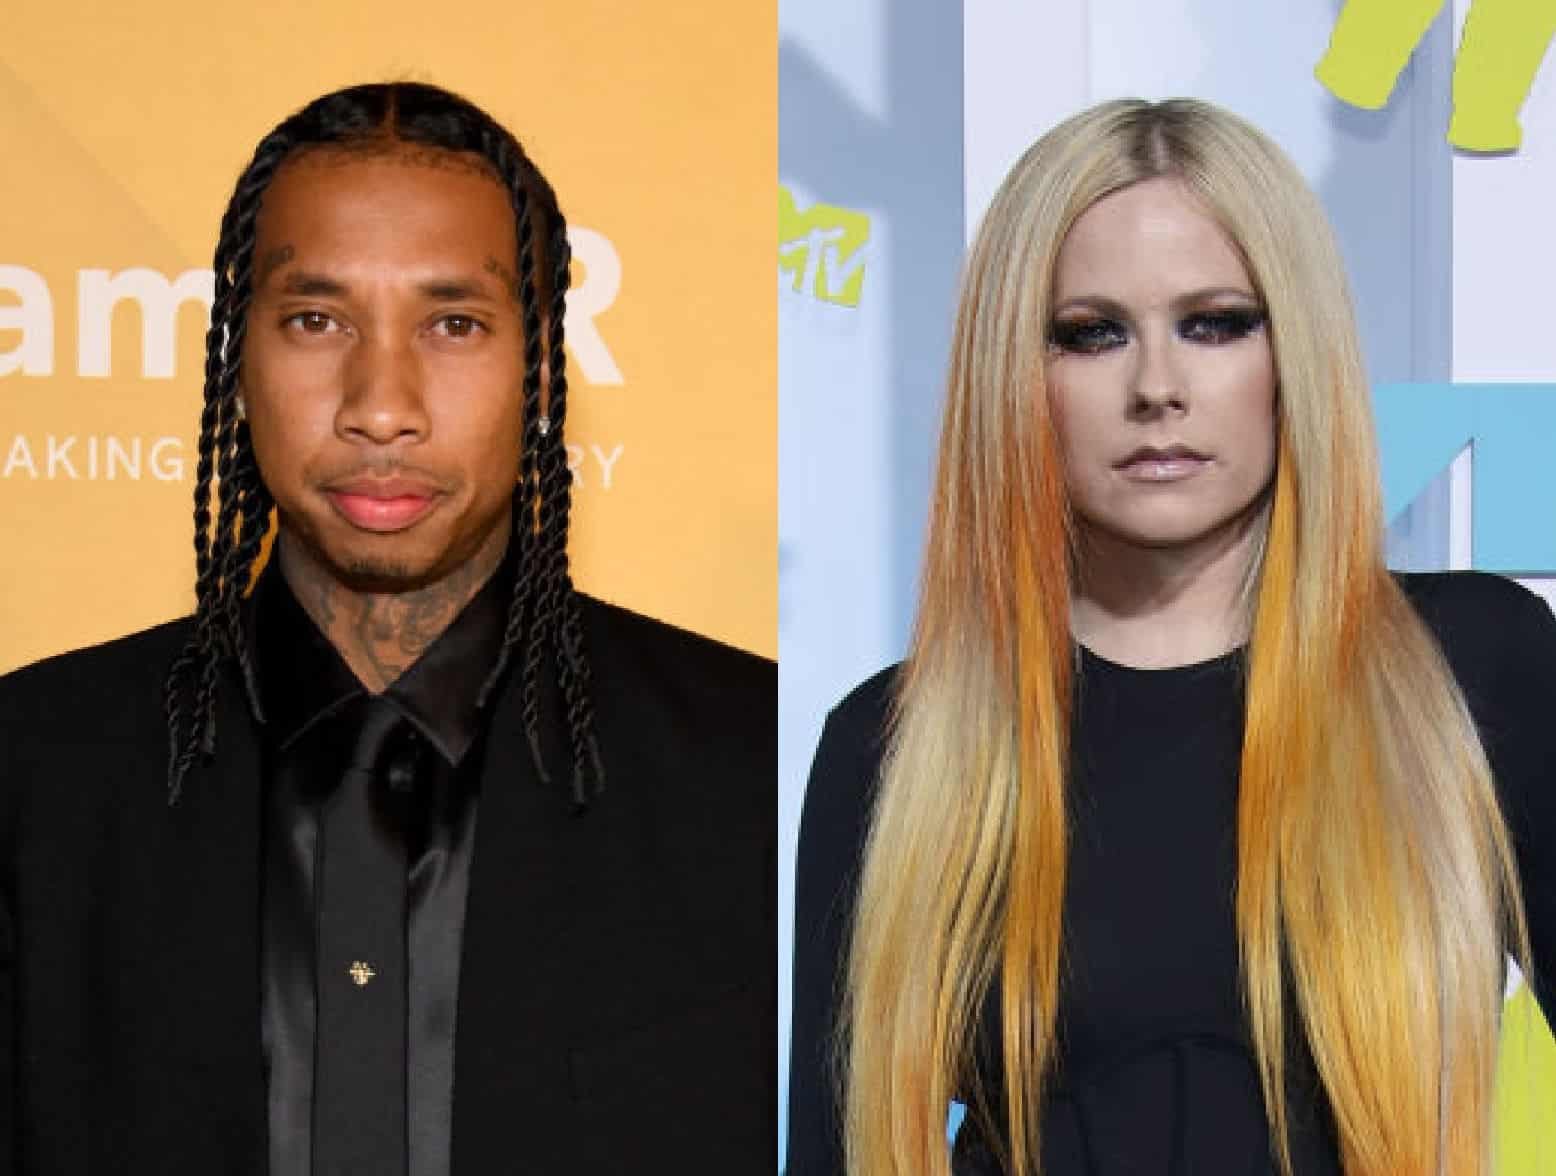 Are Tyga And Avril Lavigne Back Together? The Famous Couple in